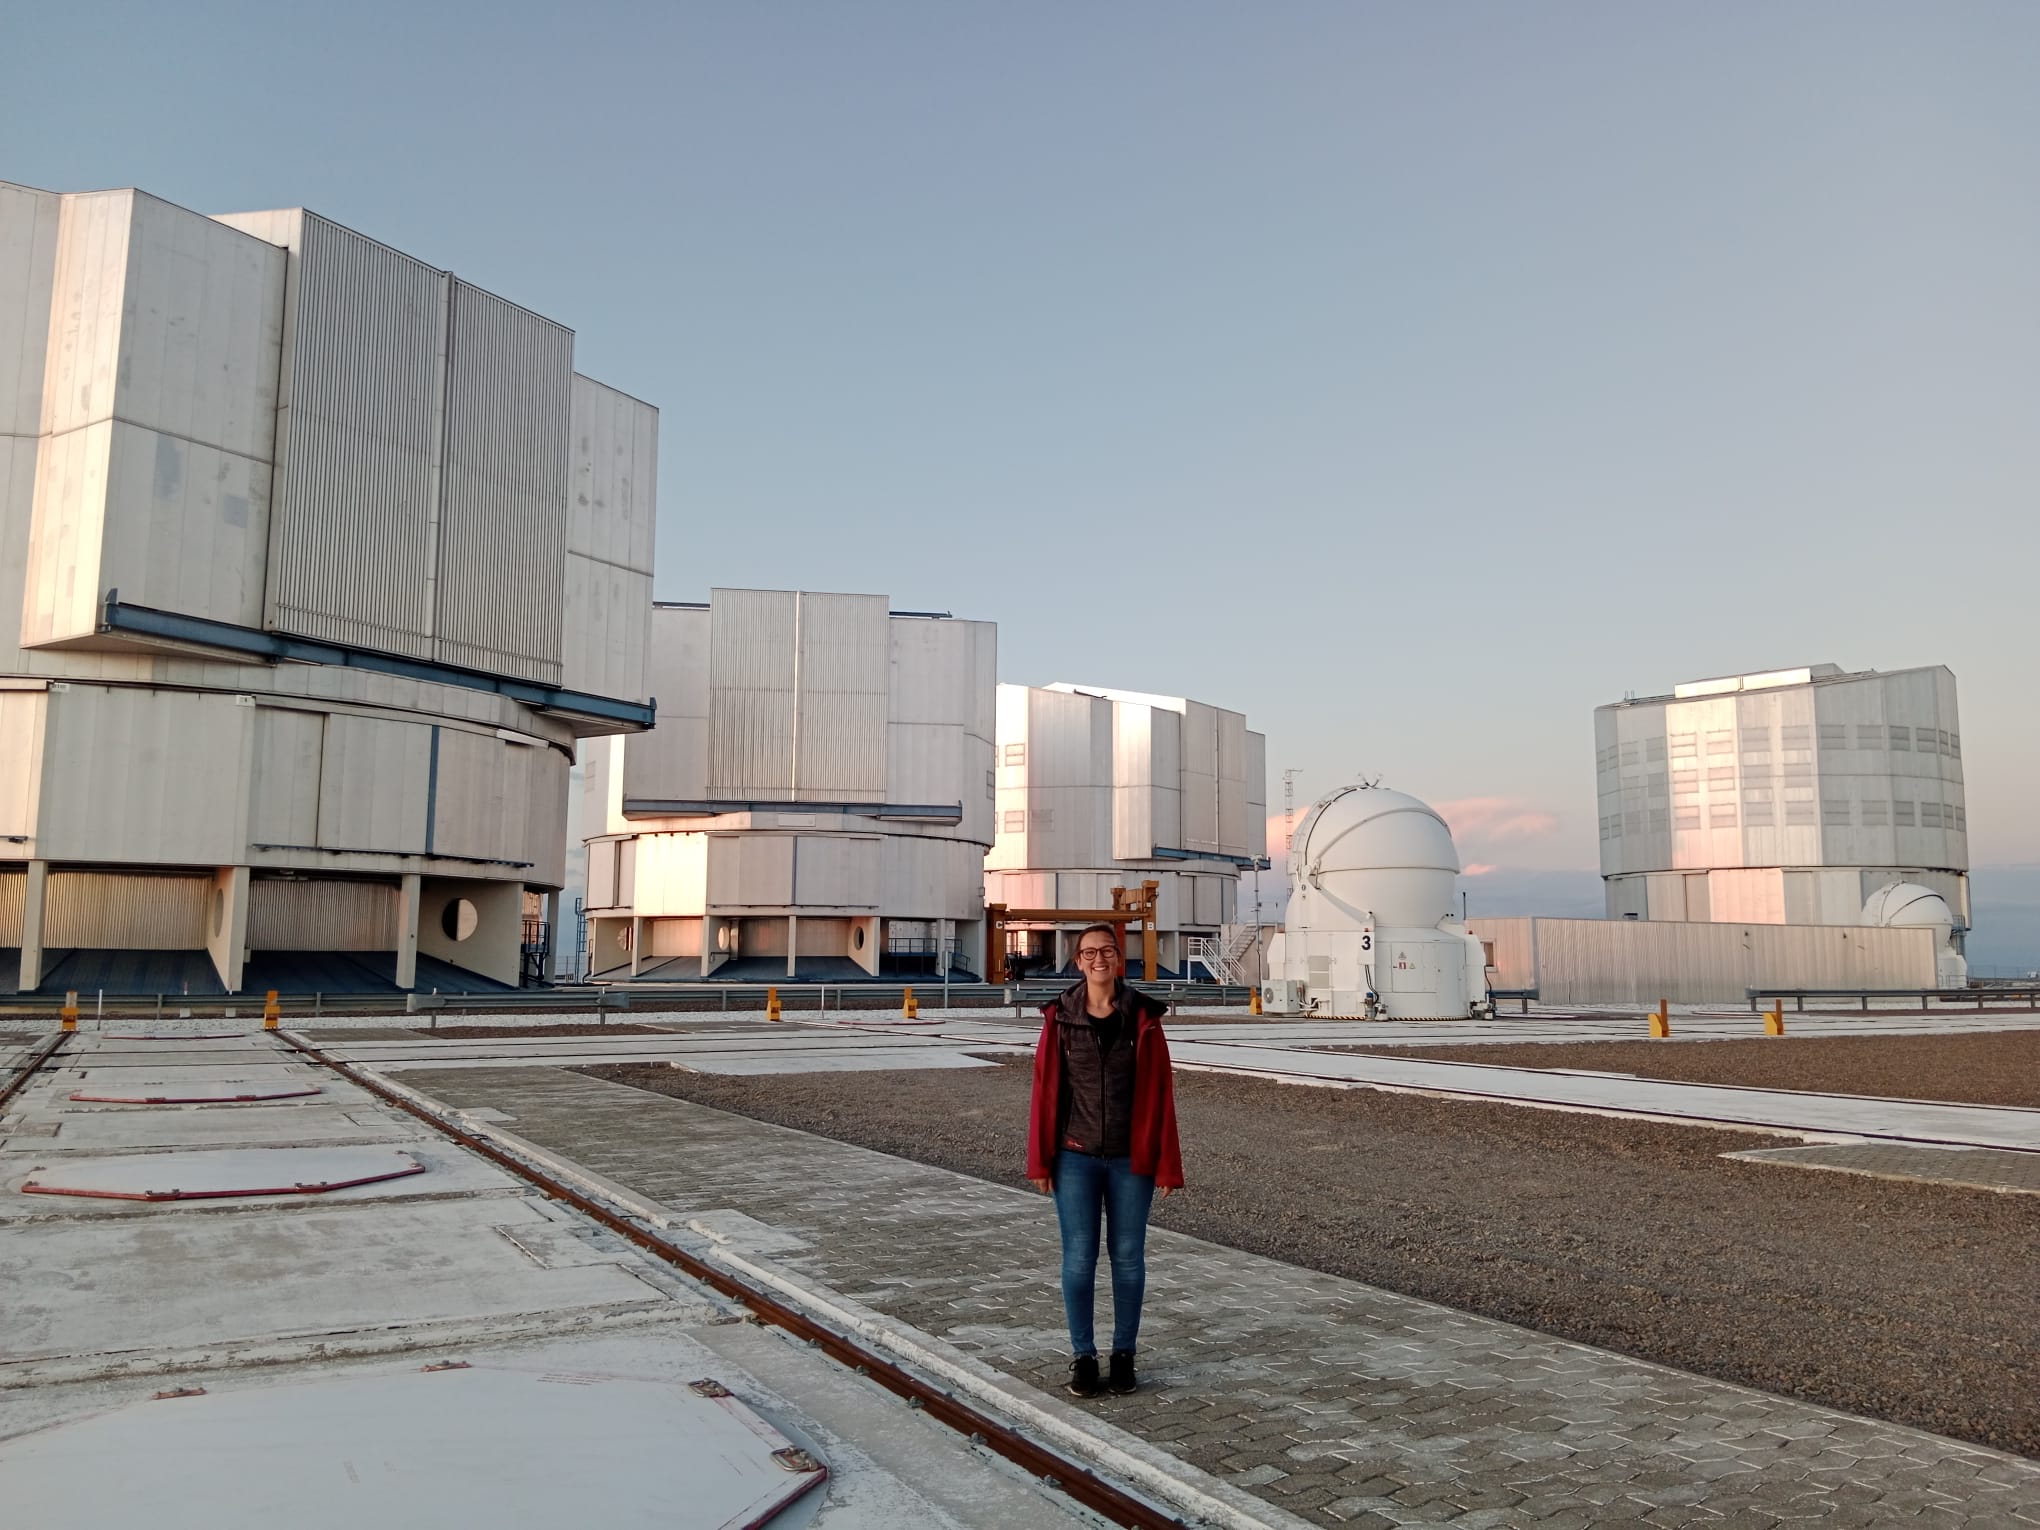 Julia in front of the Very Large Telescope (VLT).